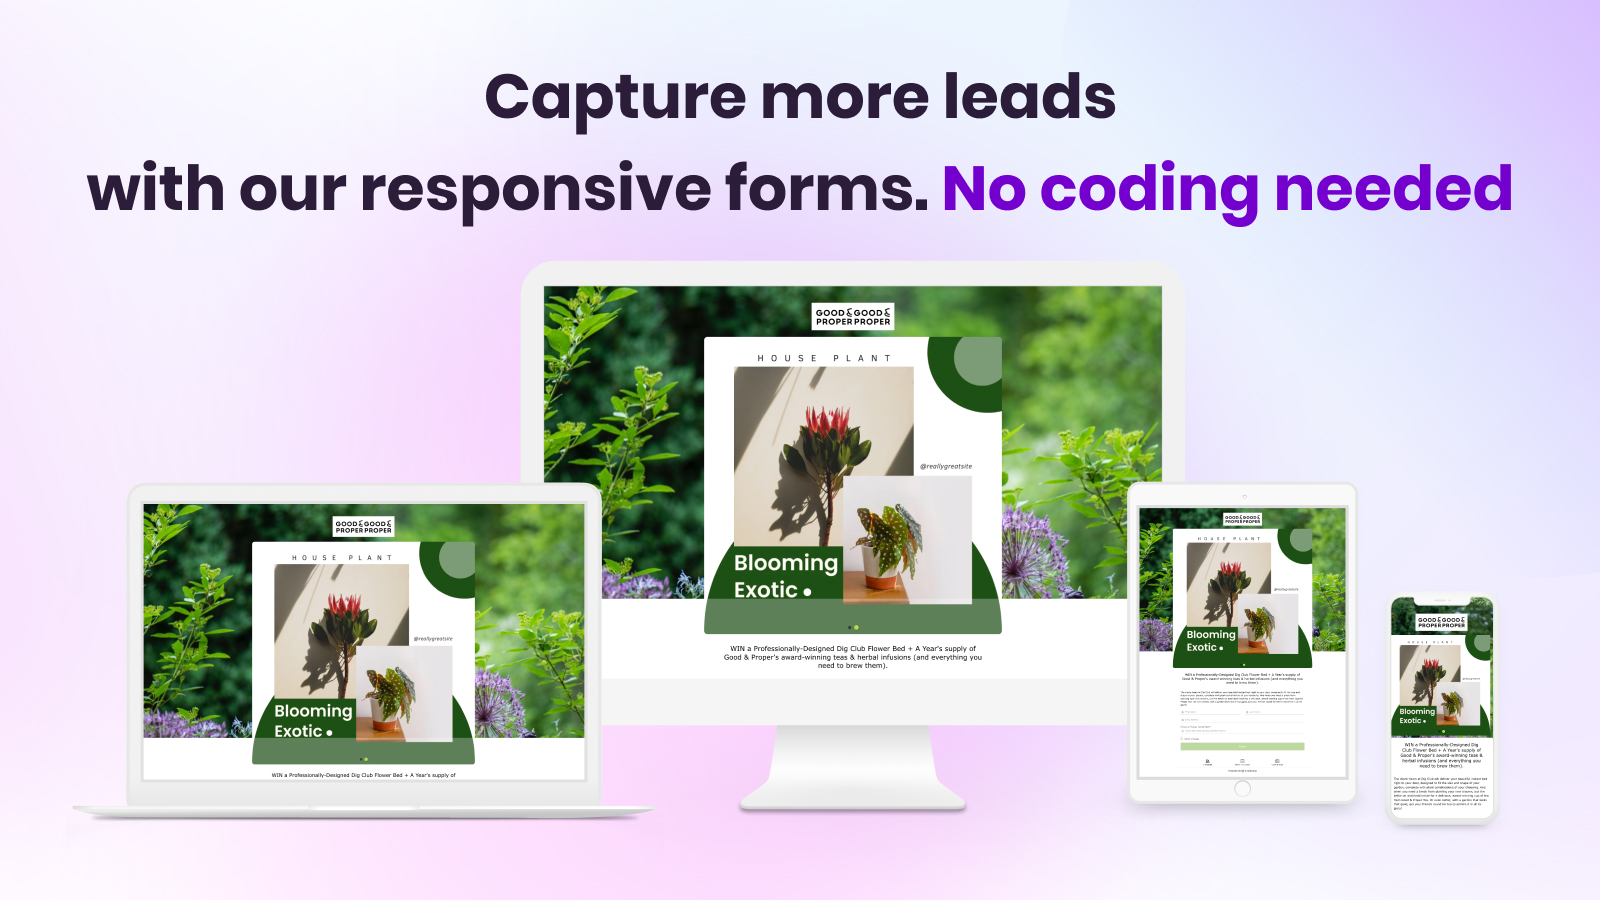 Capture more leads with our responsive forms that are instantly generated for you, no coding experience needed!